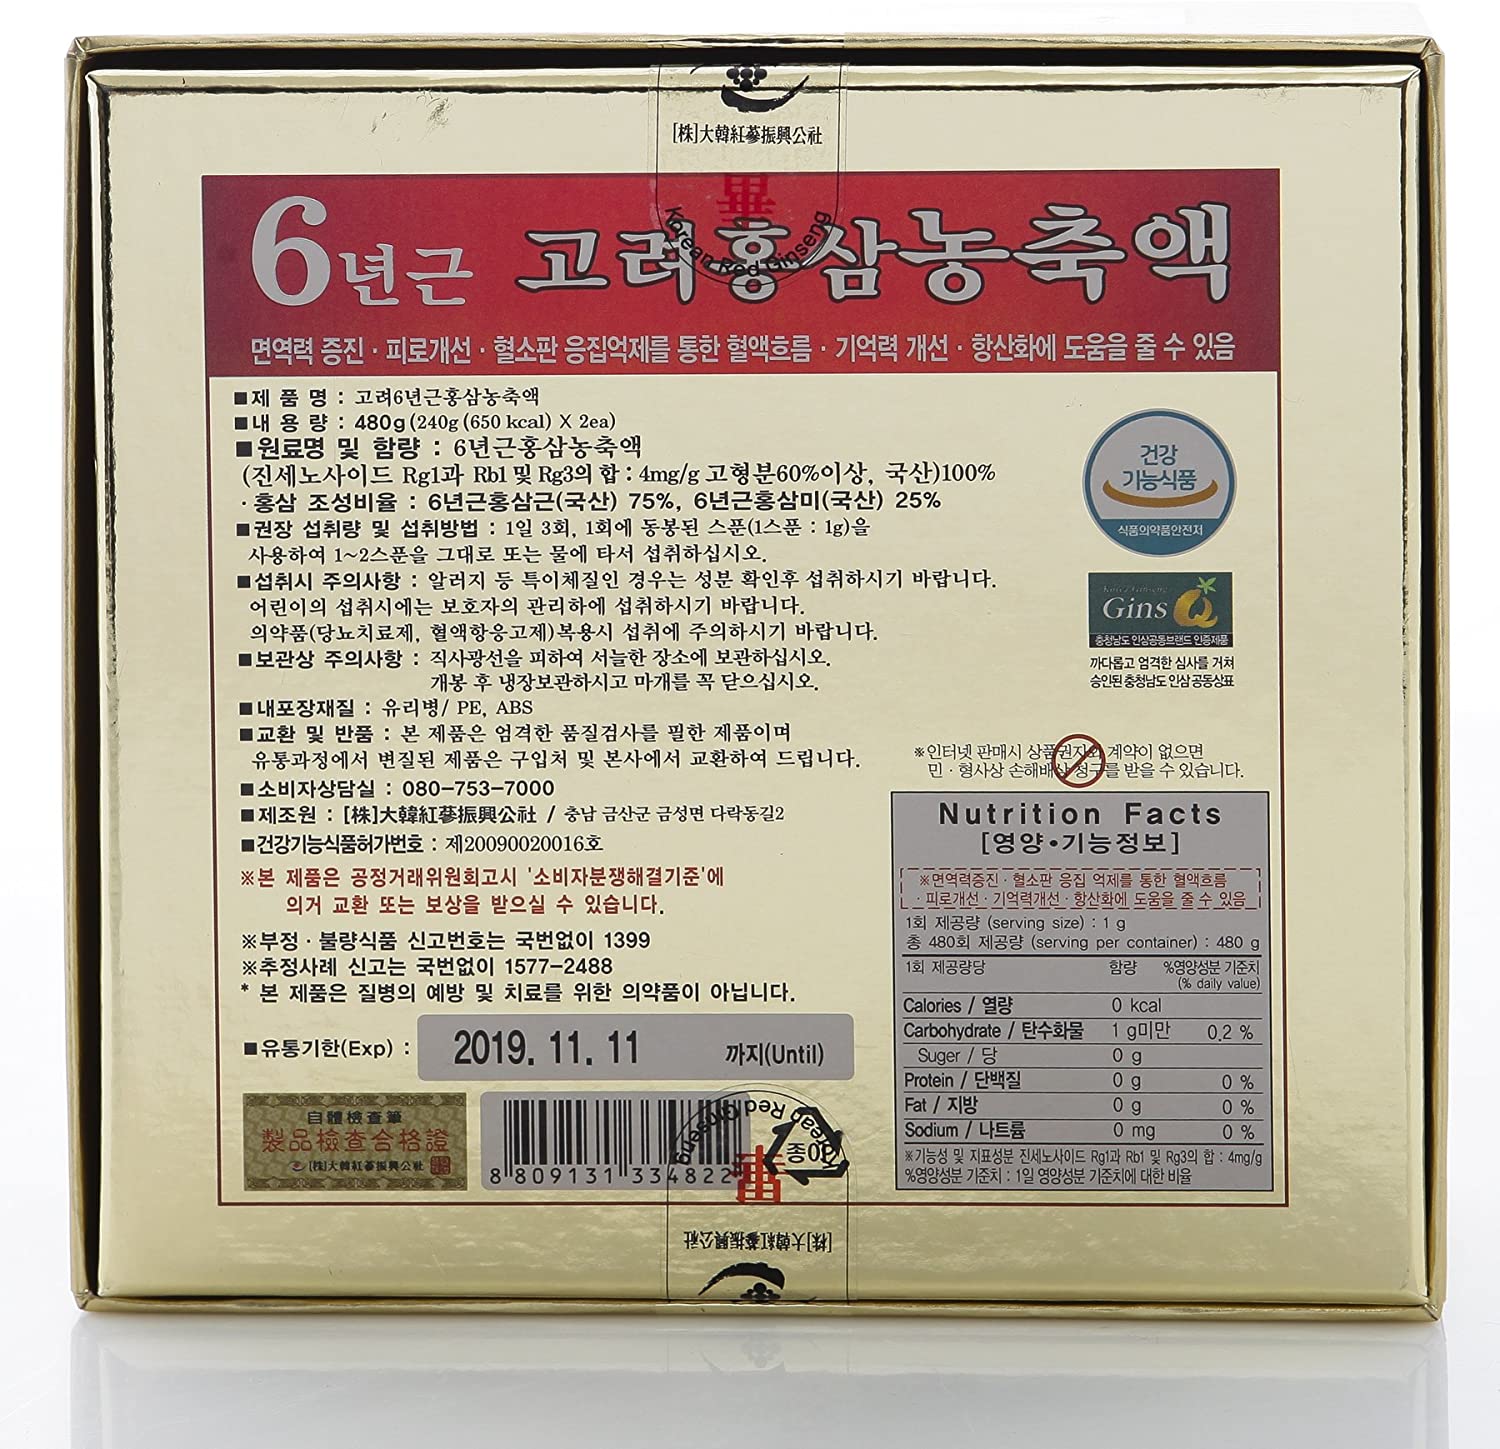 100% Pure Korean Red Ginseng Extracts Gold 6 years Roots 480g Health Supplements Foods Gifts